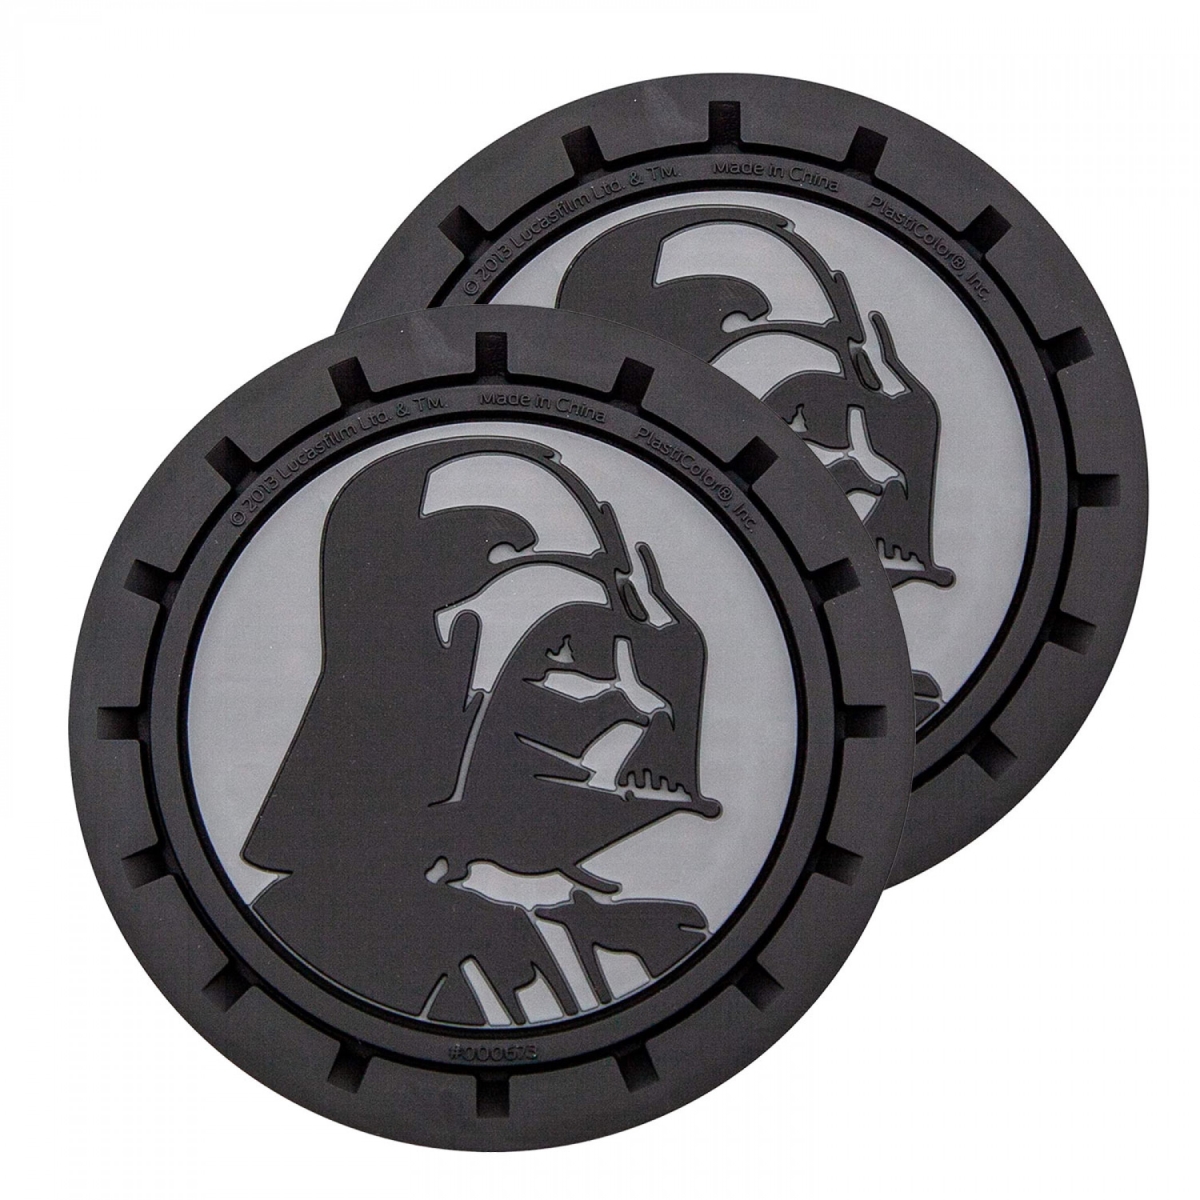 Picture of Star Wars 808042 Star Wars Darth Vader Car Cup Holder Coaster - Pack of 2